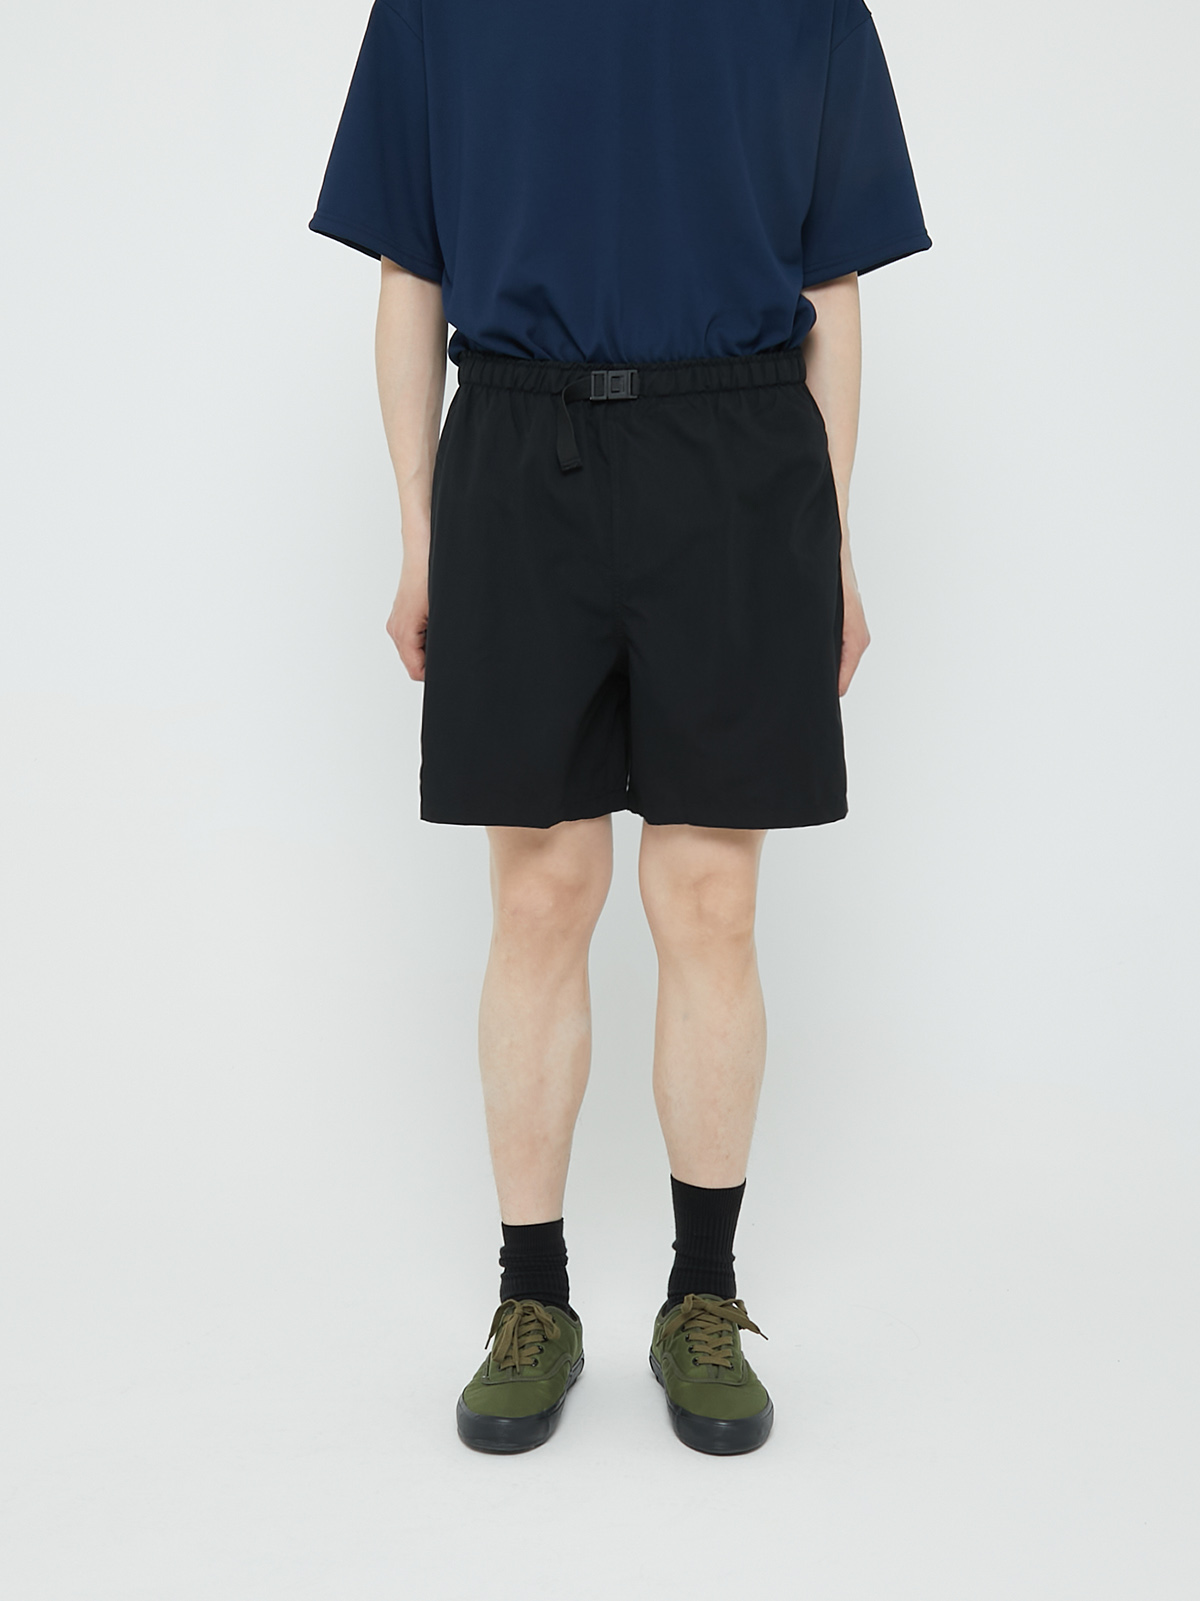 ALL WEATHER SHORTS (BLACK)